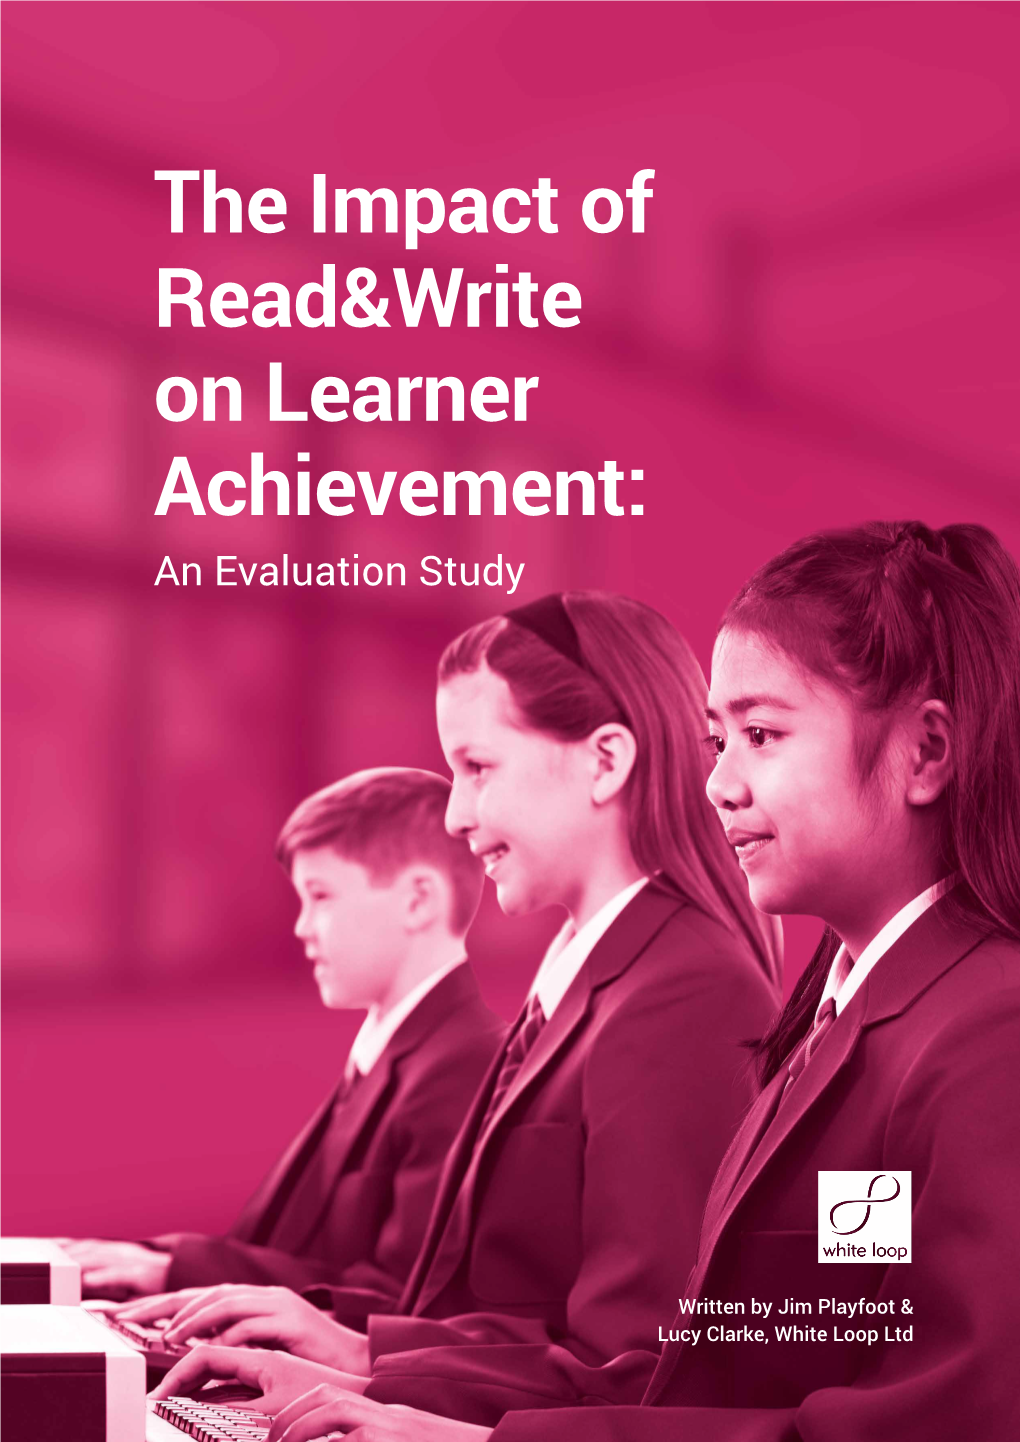 The Impact of Read&Write on Learner Achievement